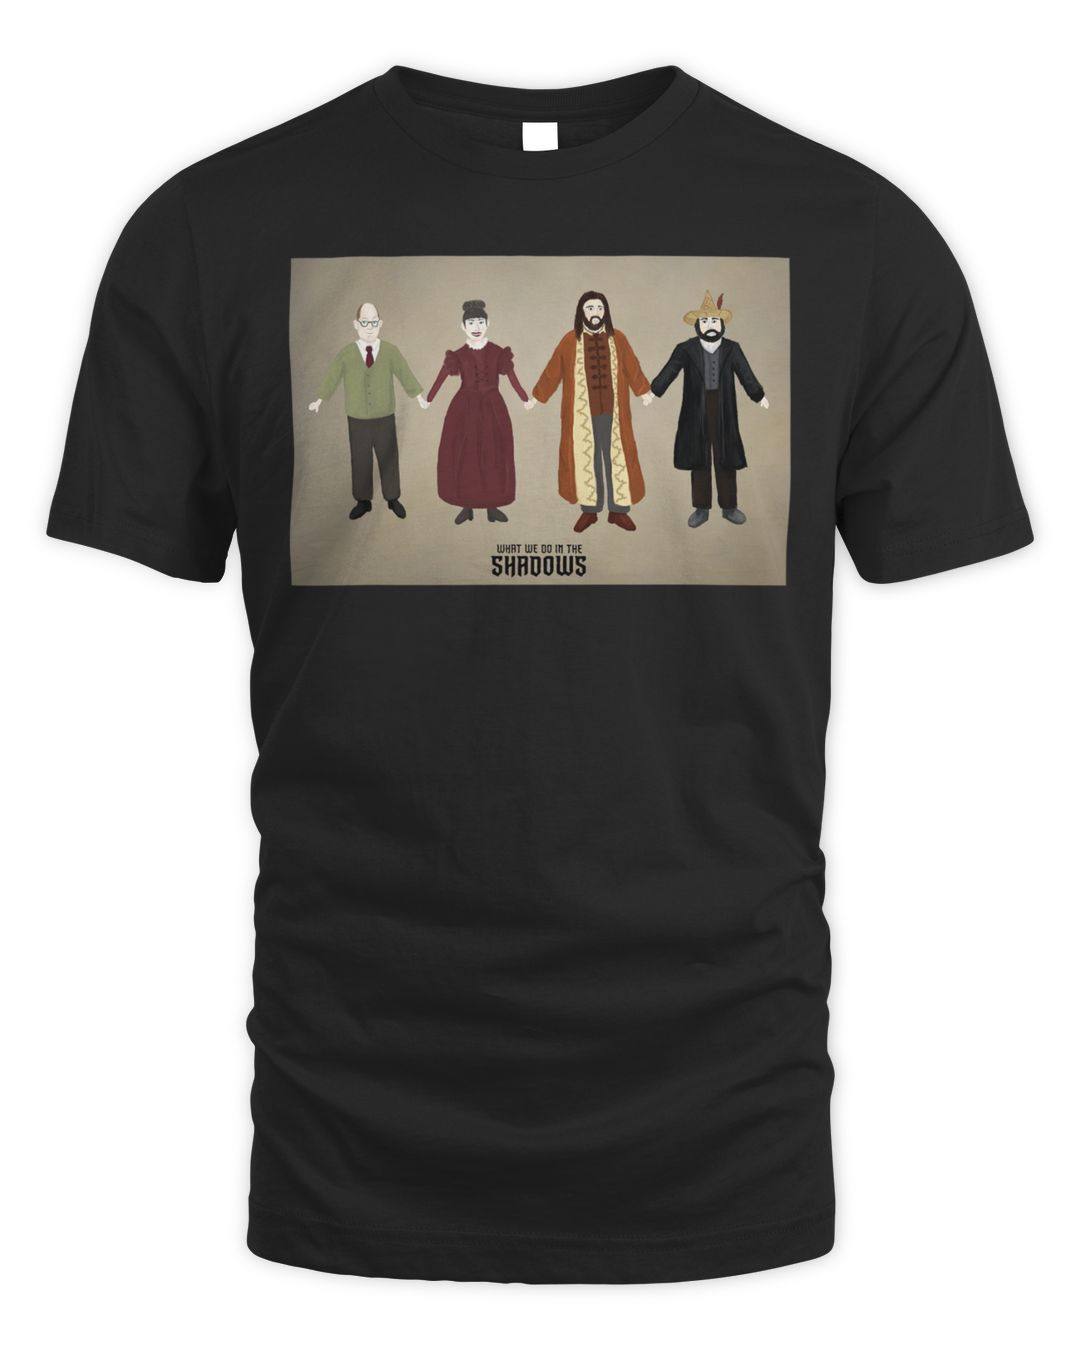 What We Do In The Shadows Merch Colins Family Photo Shirt